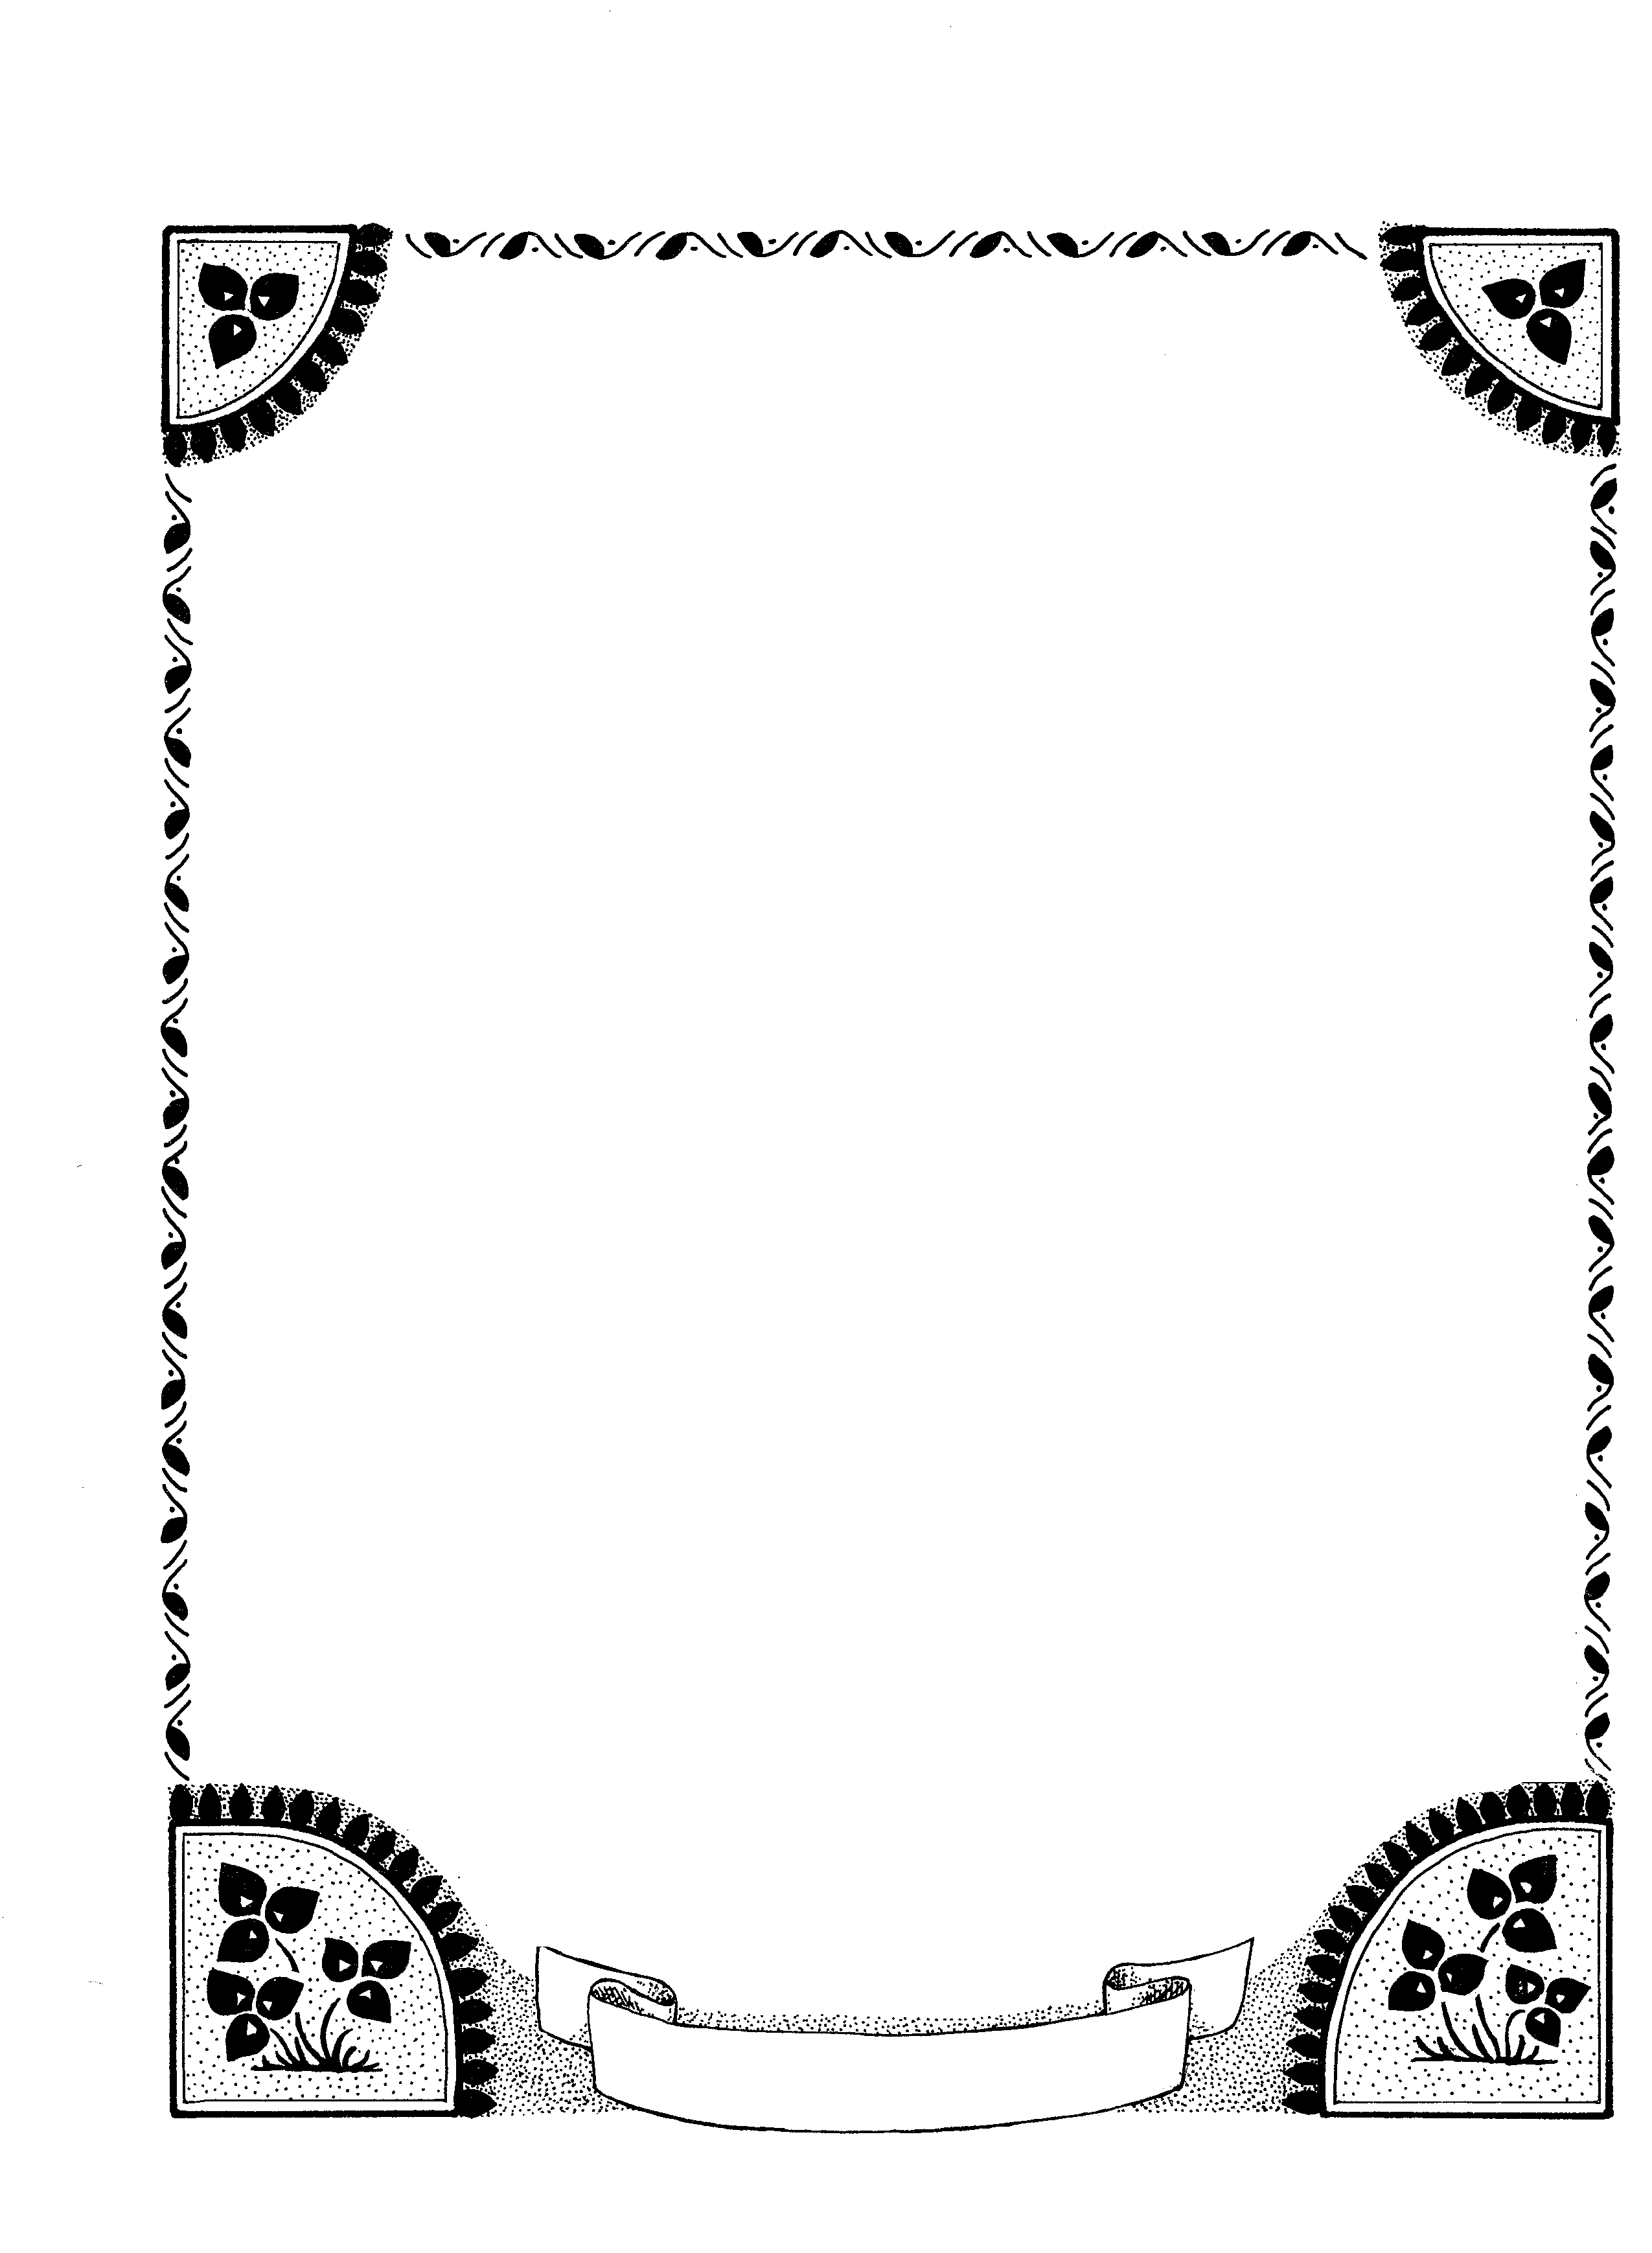 free-black-and-white-page-borders-download-free-black-and-white-page-borders-png-images-free